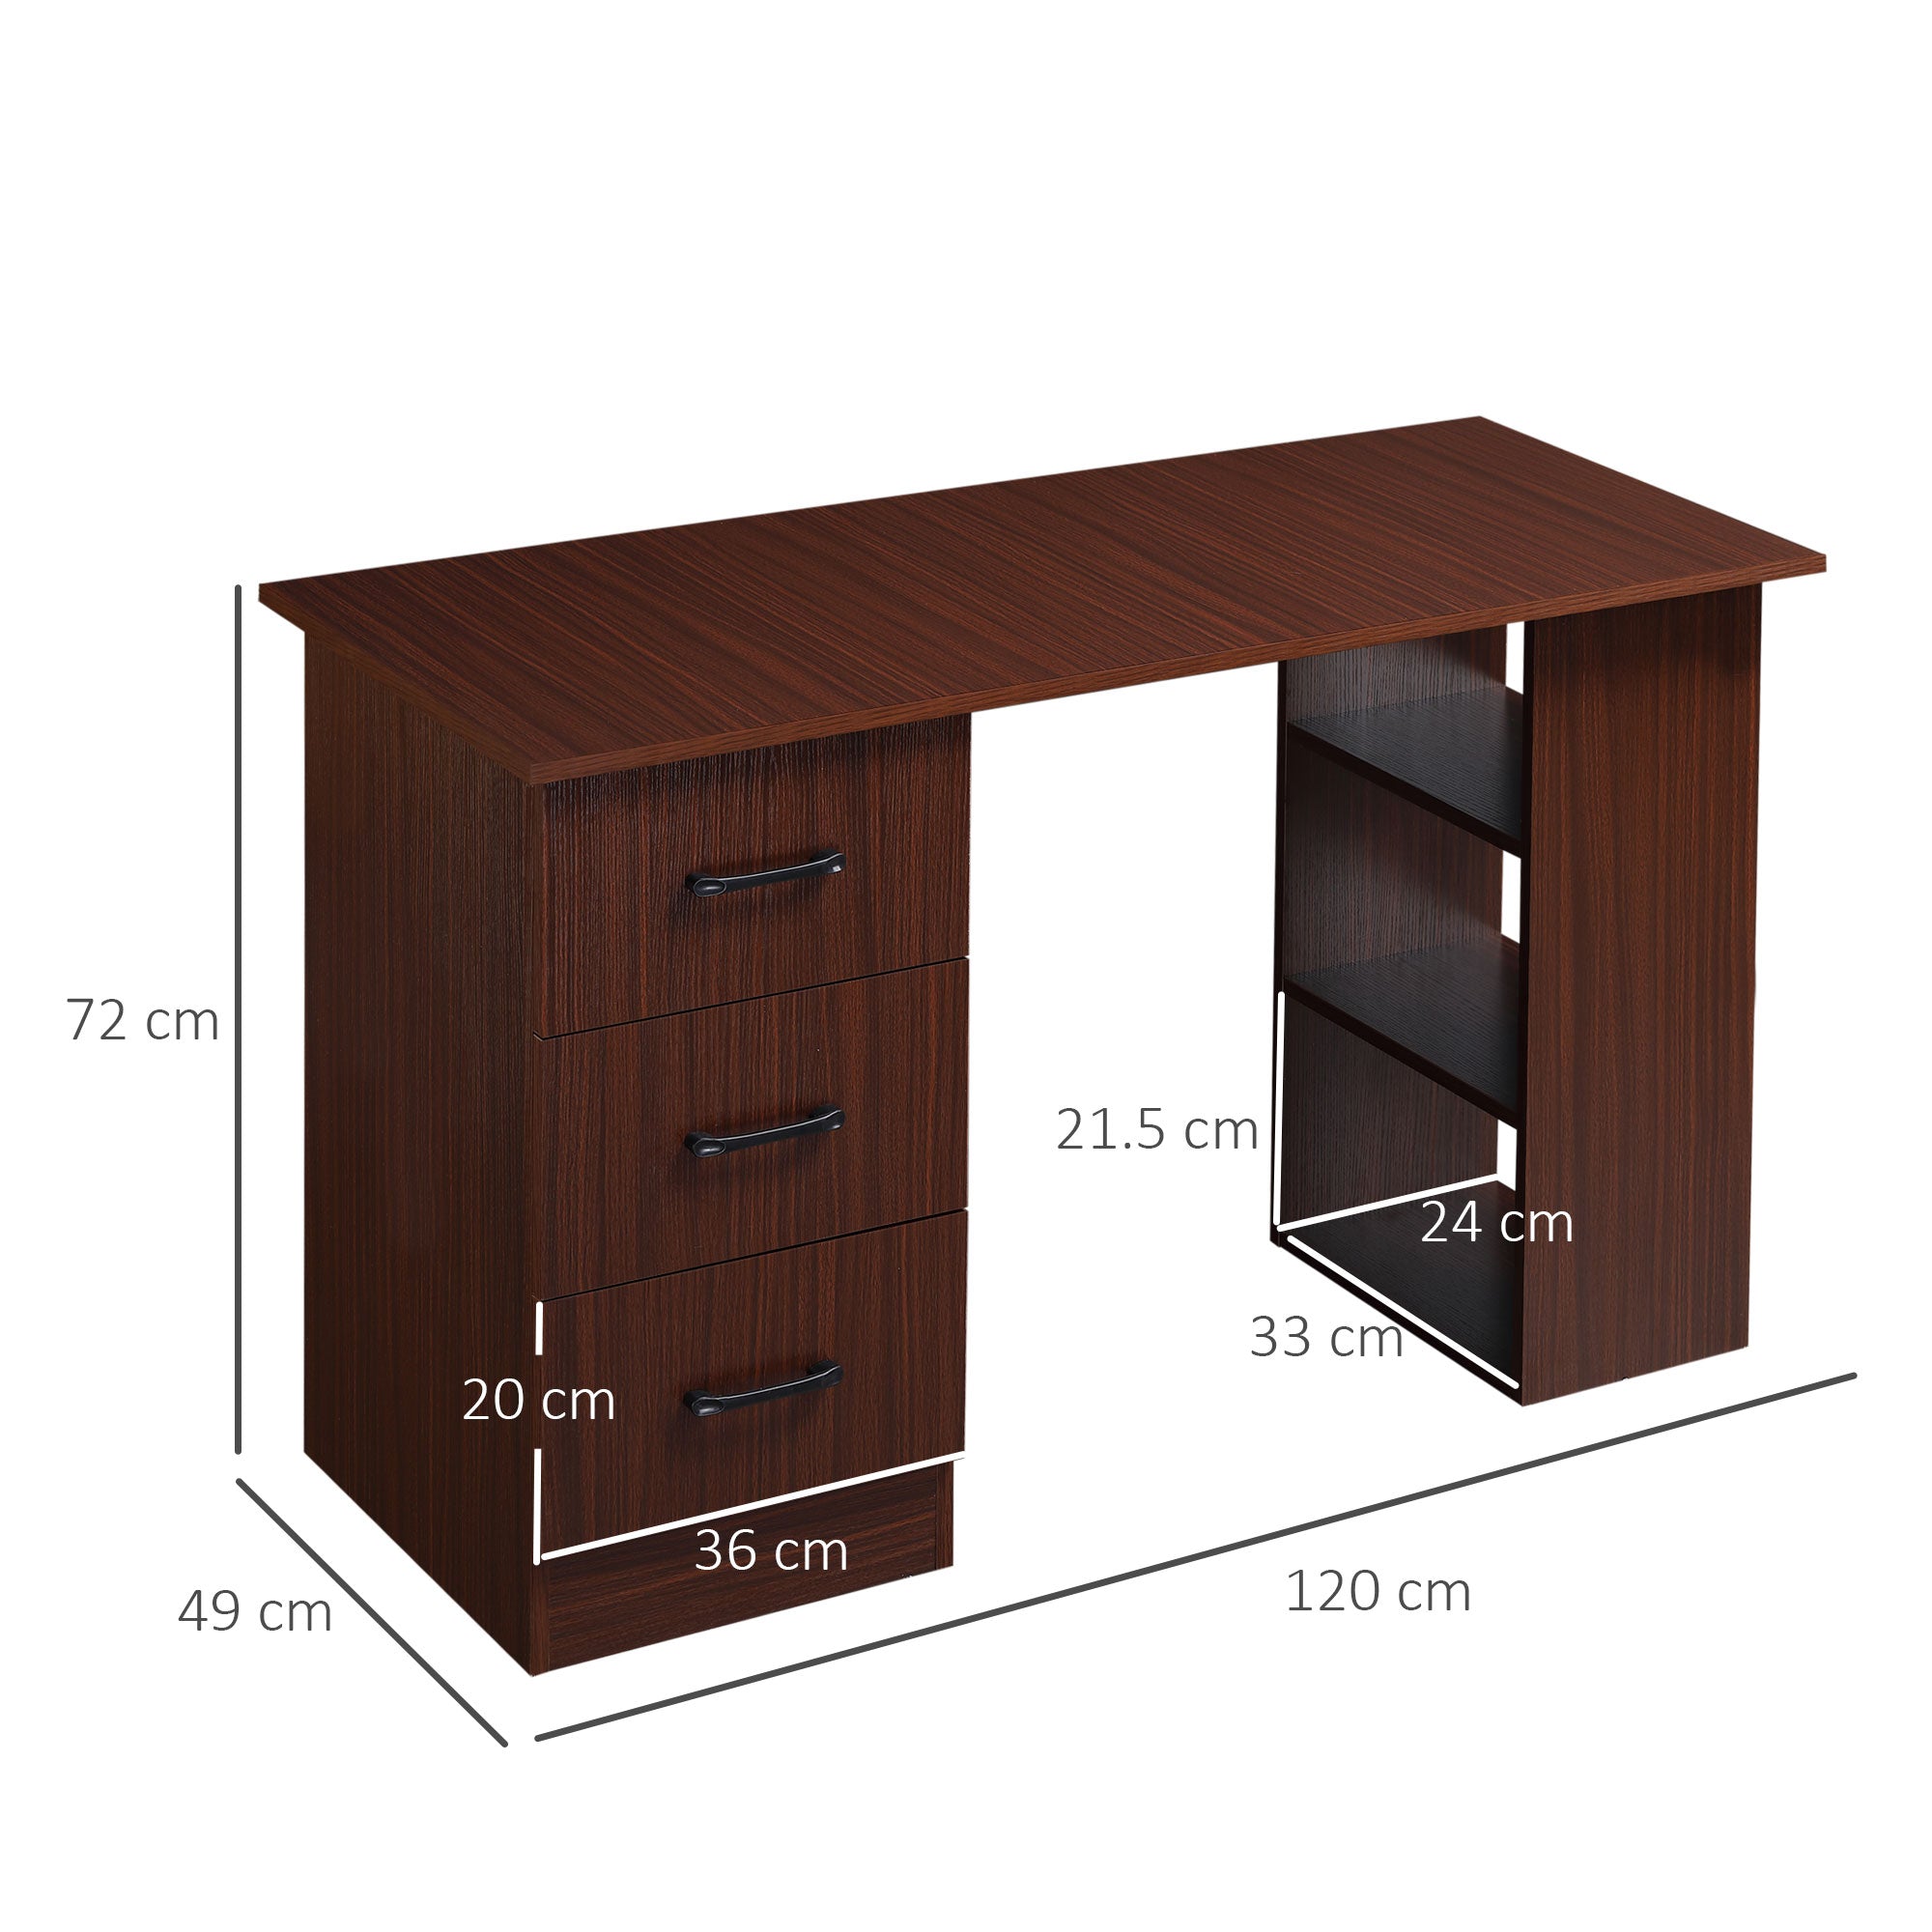 120cm Computer Desk with Storage Shelves Drawers, Writing Table Study Workstation for Home Office, Walnut Brown-2